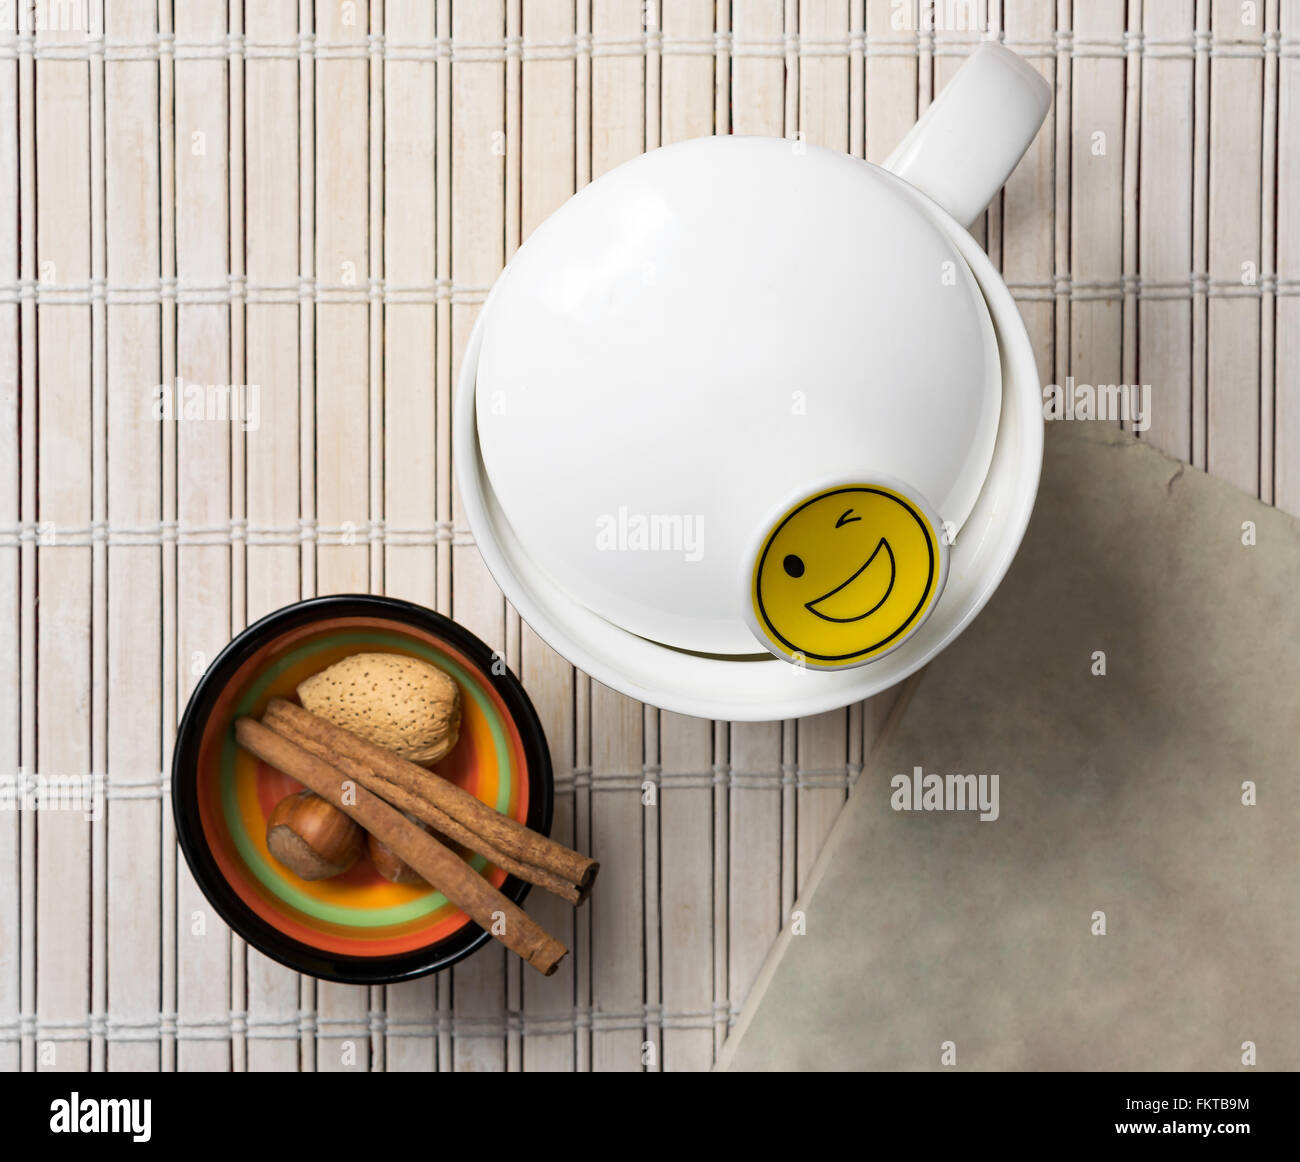 White mug with a smiley face emoji and Cinnamon sticks, nuts, and almond in a small colorful bowl Stock Photo